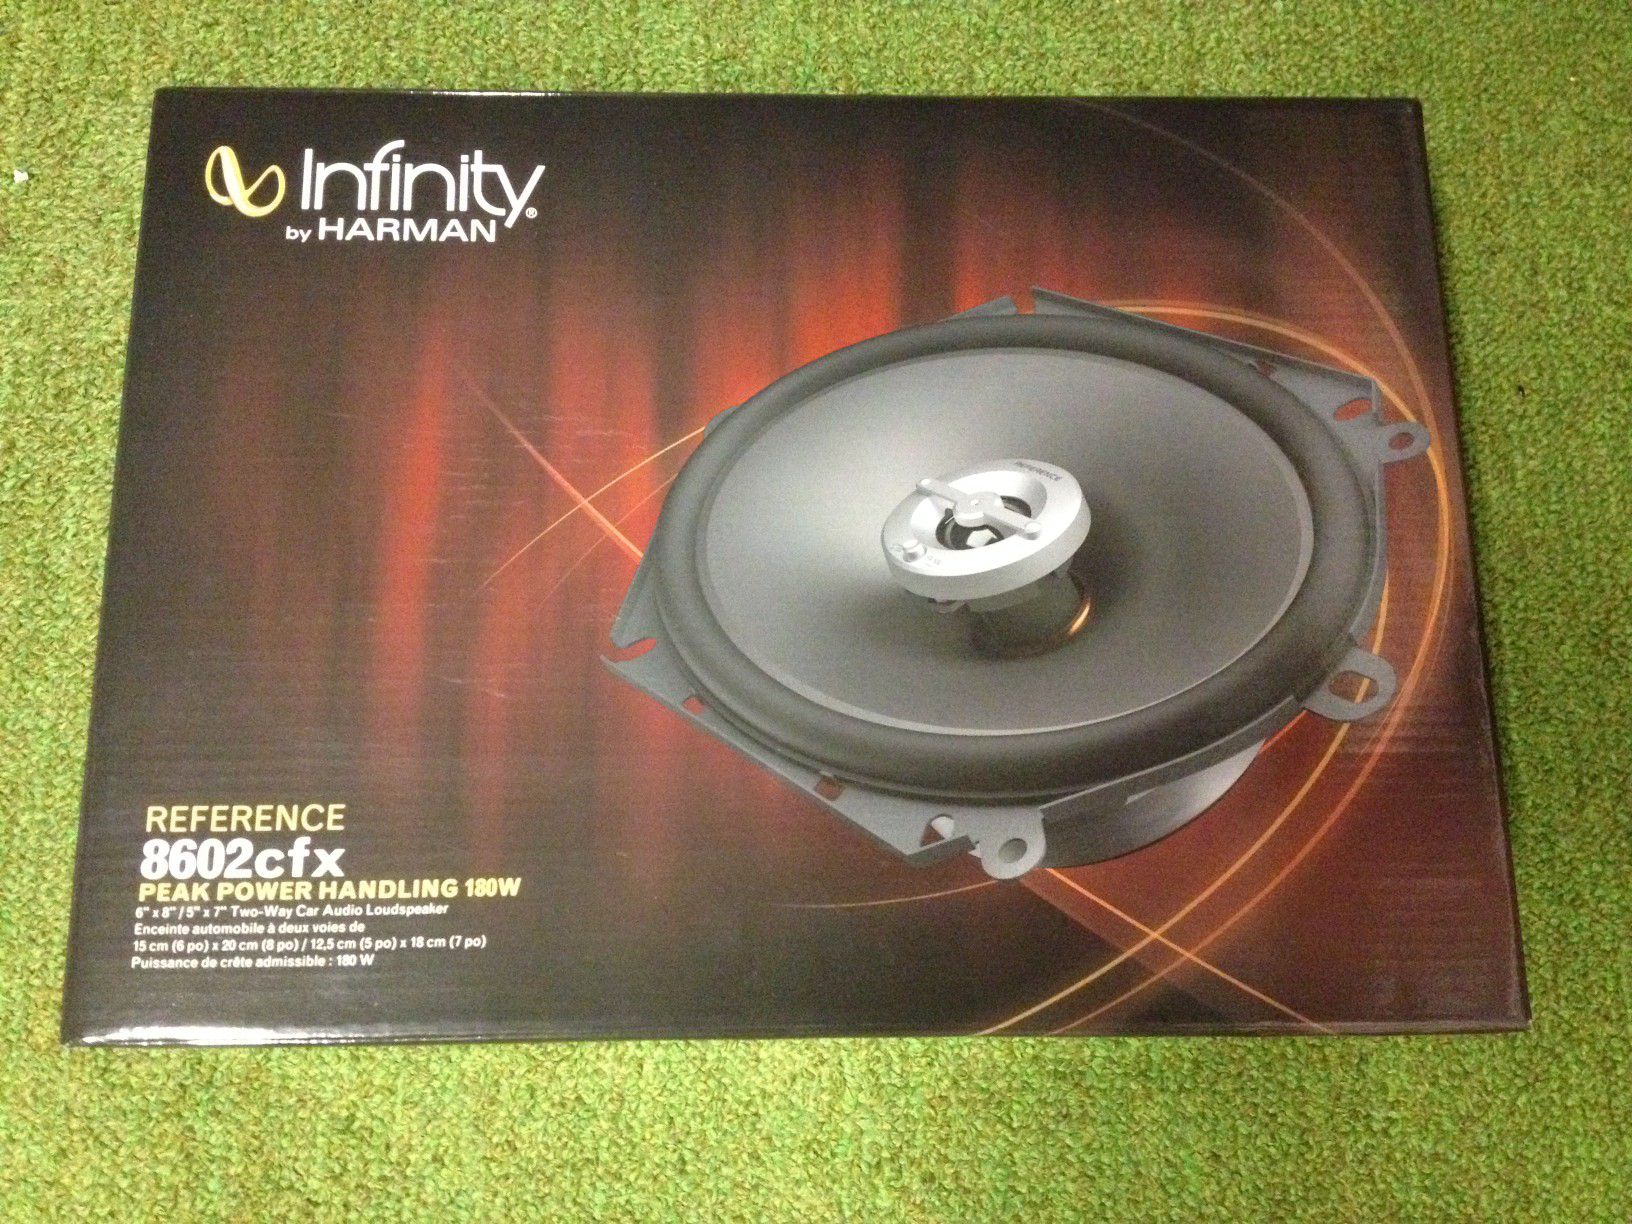 Infinity Reference 8602cfx 6" x 8" / 5" x 7" Two Way Car Speakers